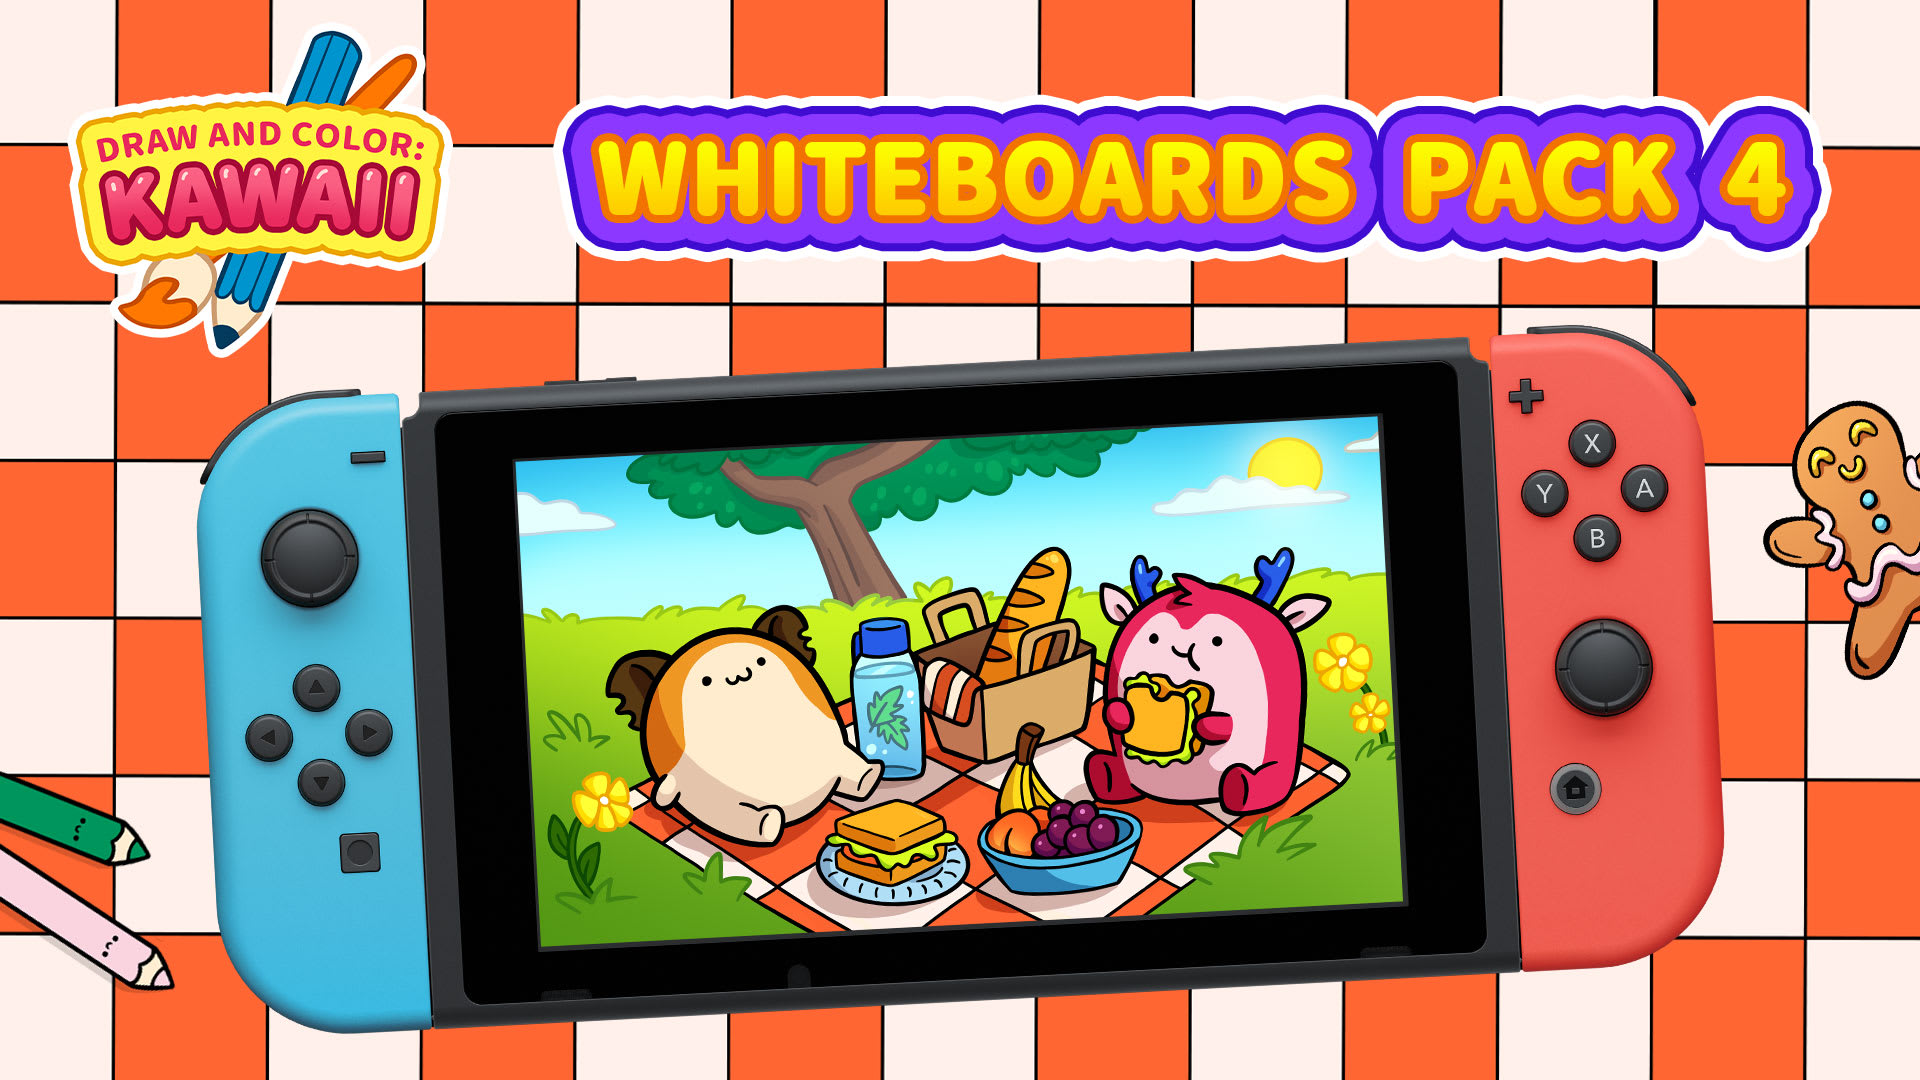 Whiteboards Pack 4